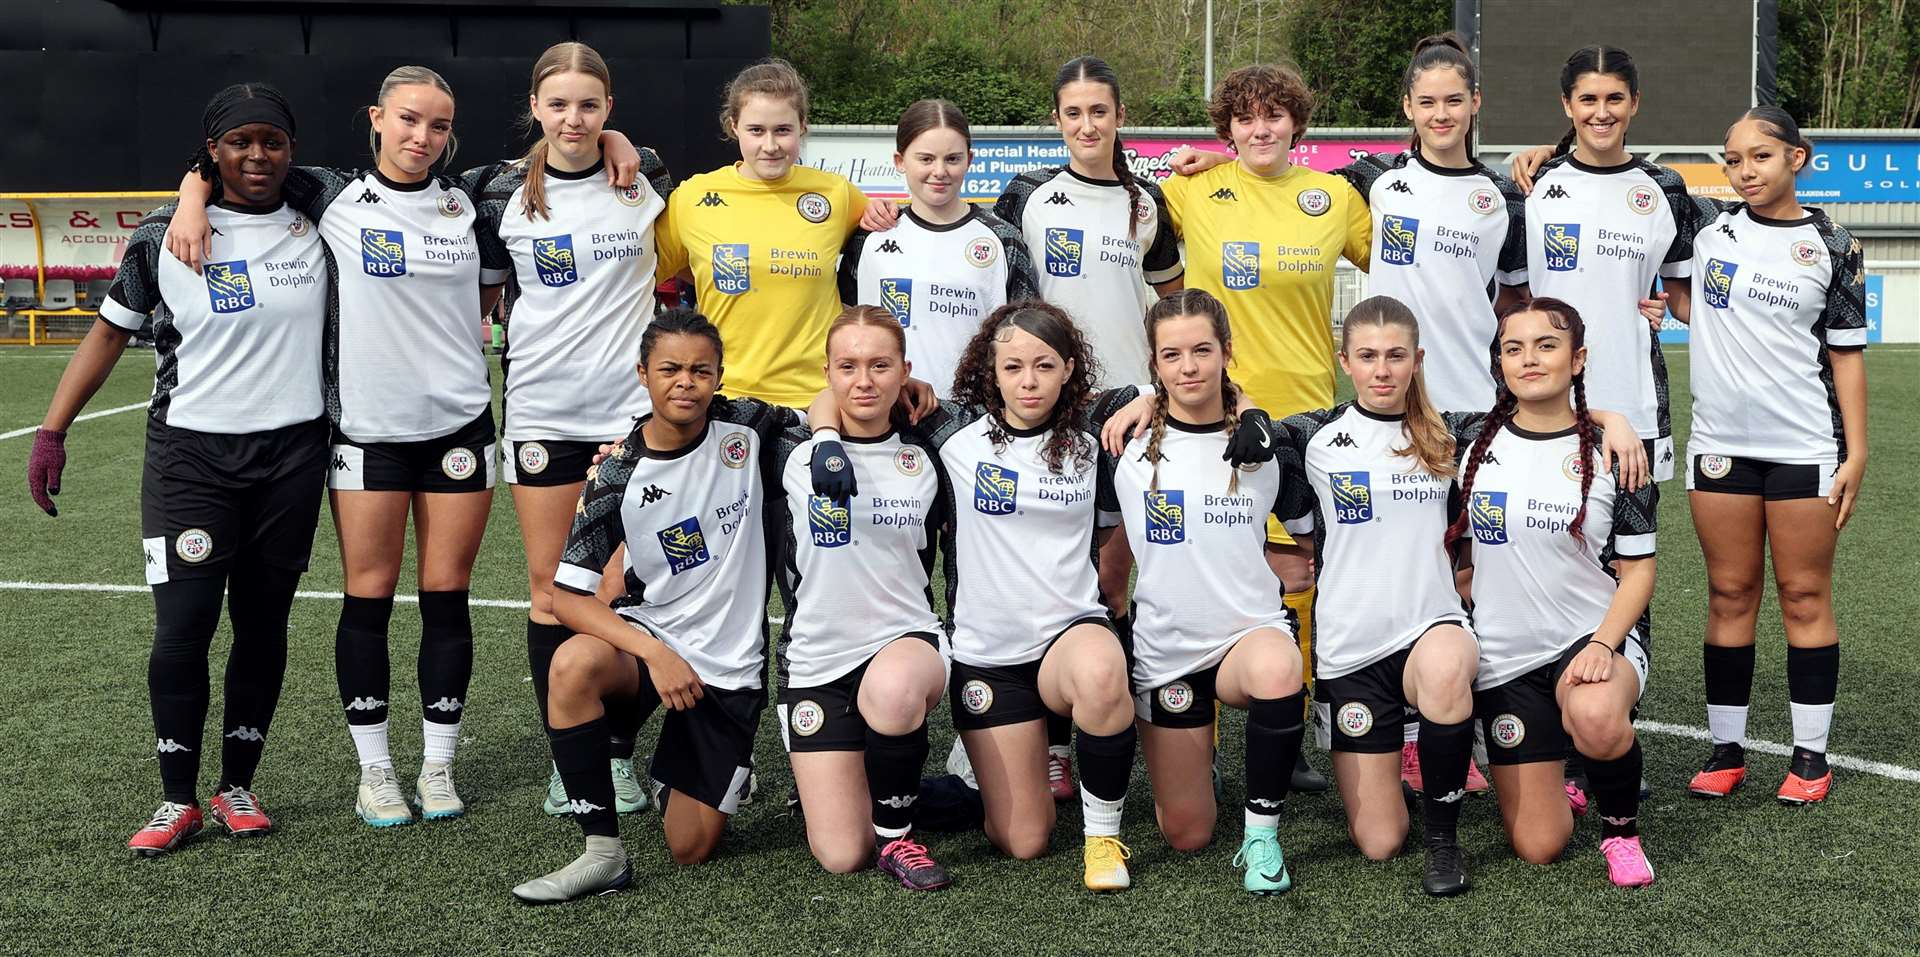 Bromley - defeated in the Kent Merit Under-16 Girls Cup Final. Picture: PSP Images